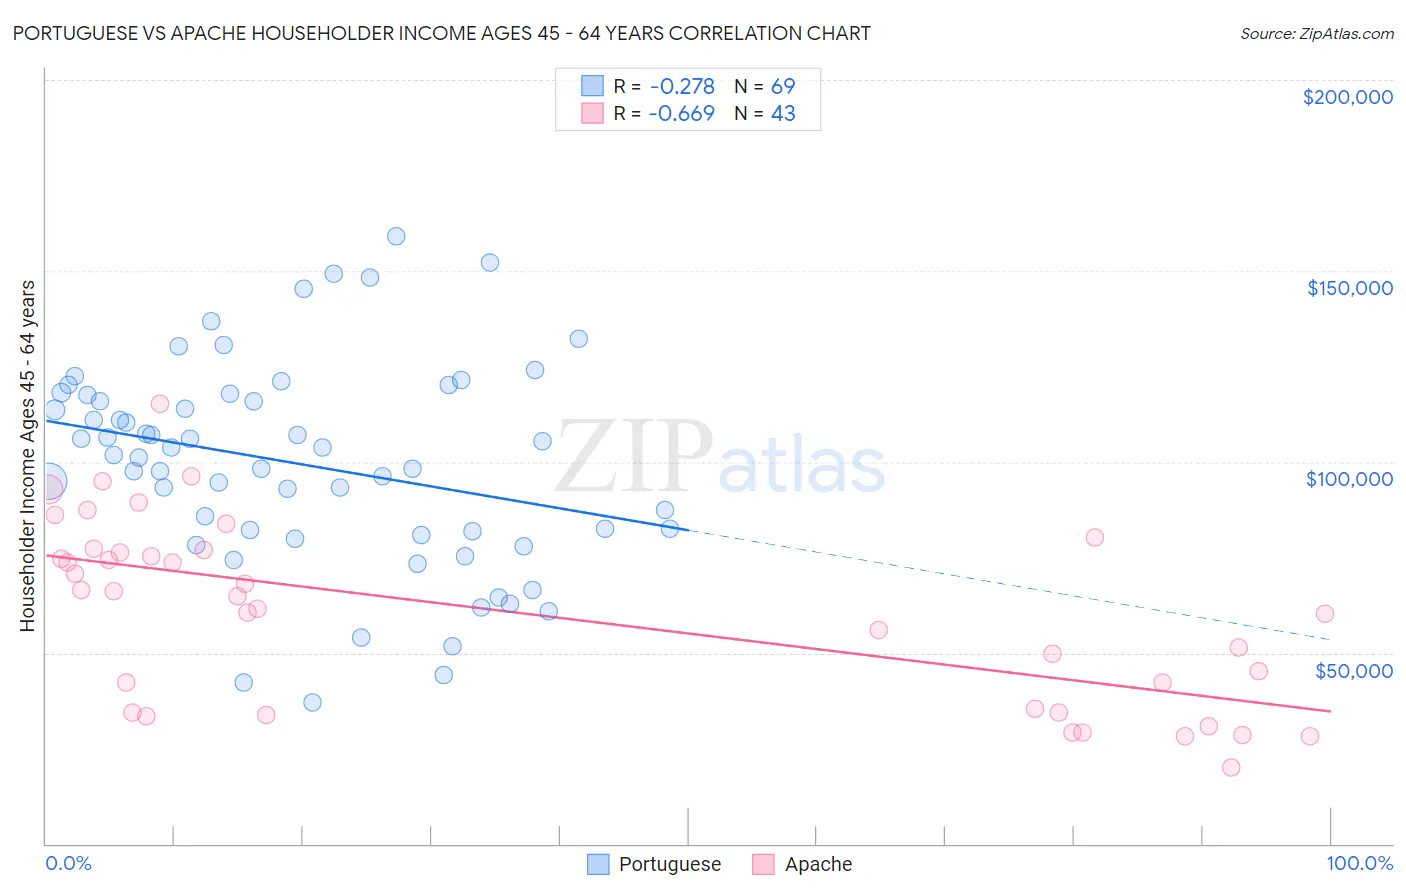 Portuguese vs Apache Householder Income Ages 45 - 64 years